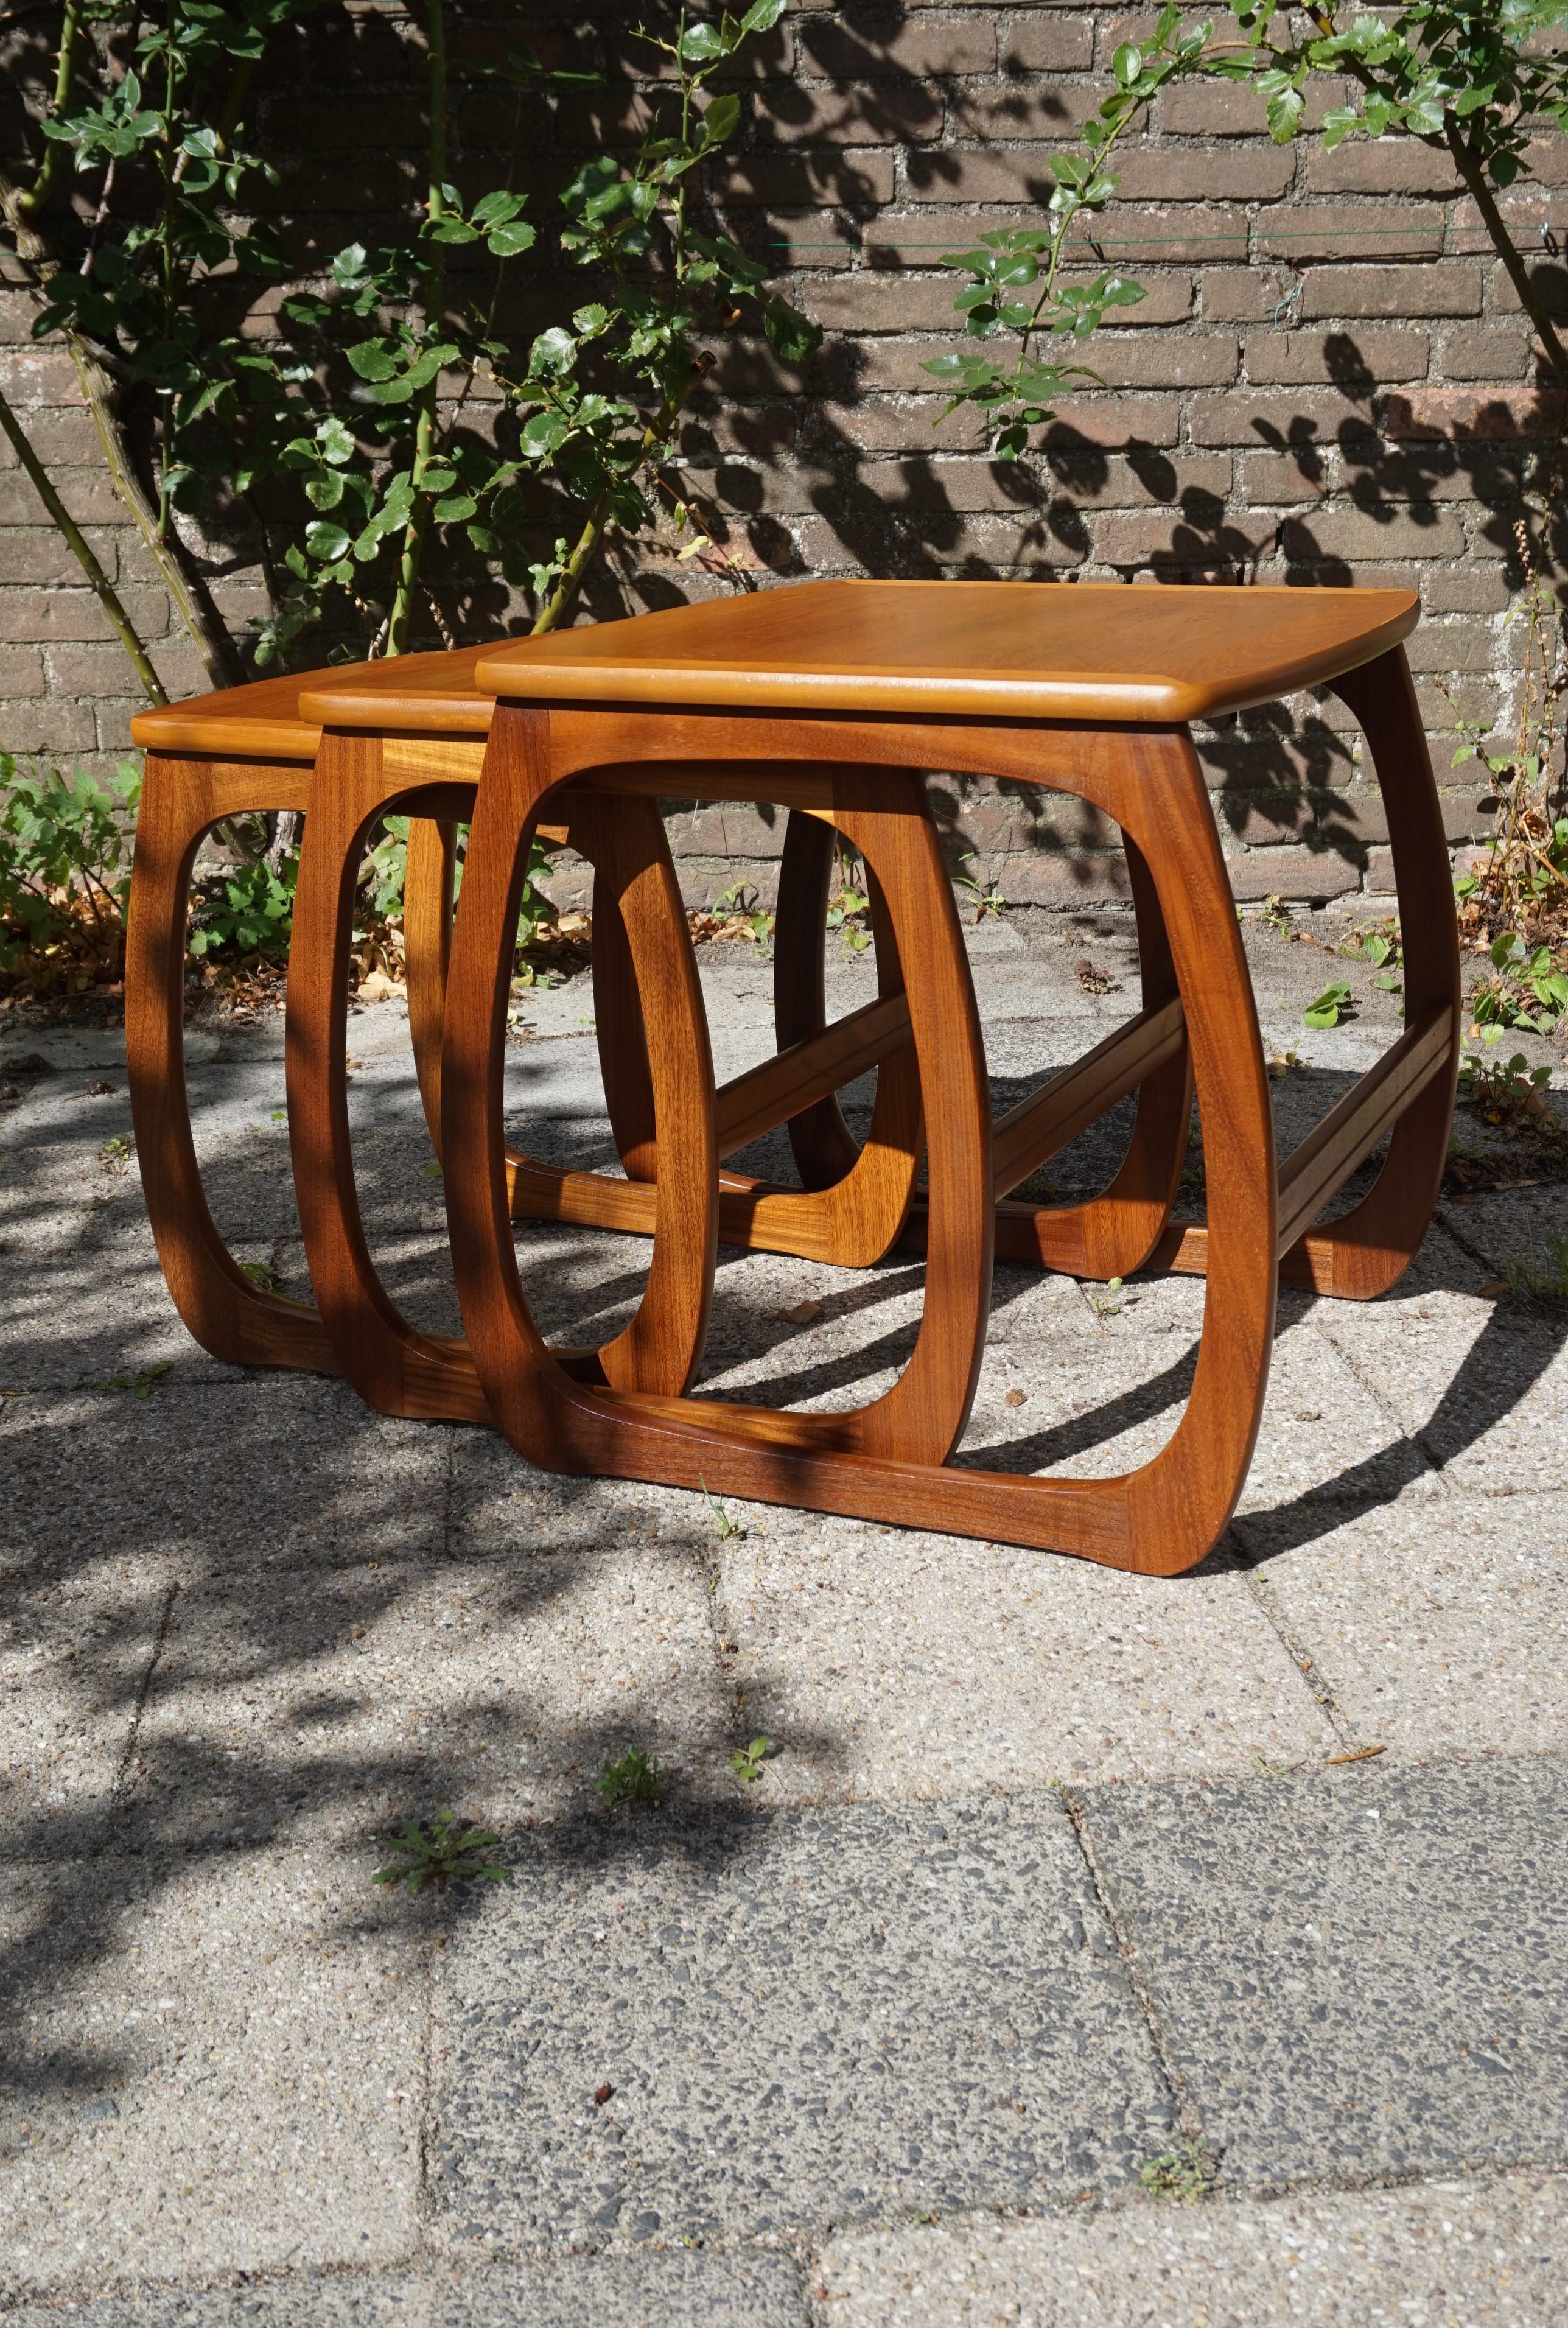 Wonderful shape and condition nest of tables.

If you are looking for an aesthetically pleasing and practical set of tables to upgrade the interior of your midcentury apartment or office then this nest of tables could be perfect for you. We think it